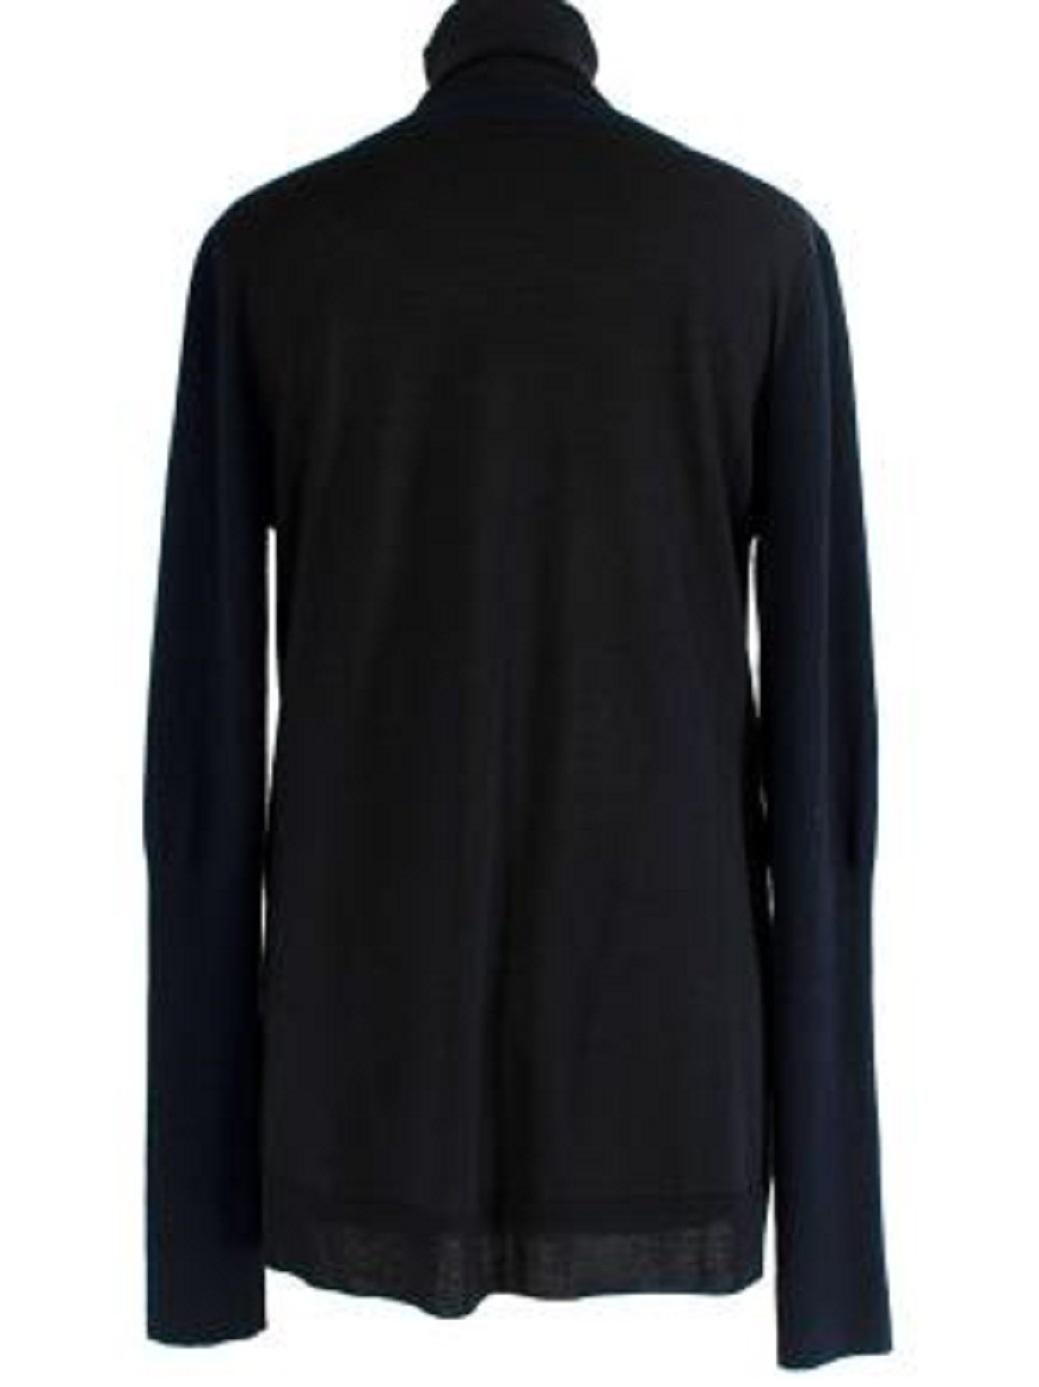 Louis Vuitton Black & Navy Layered Jumper In Good Condition For Sale In London, GB